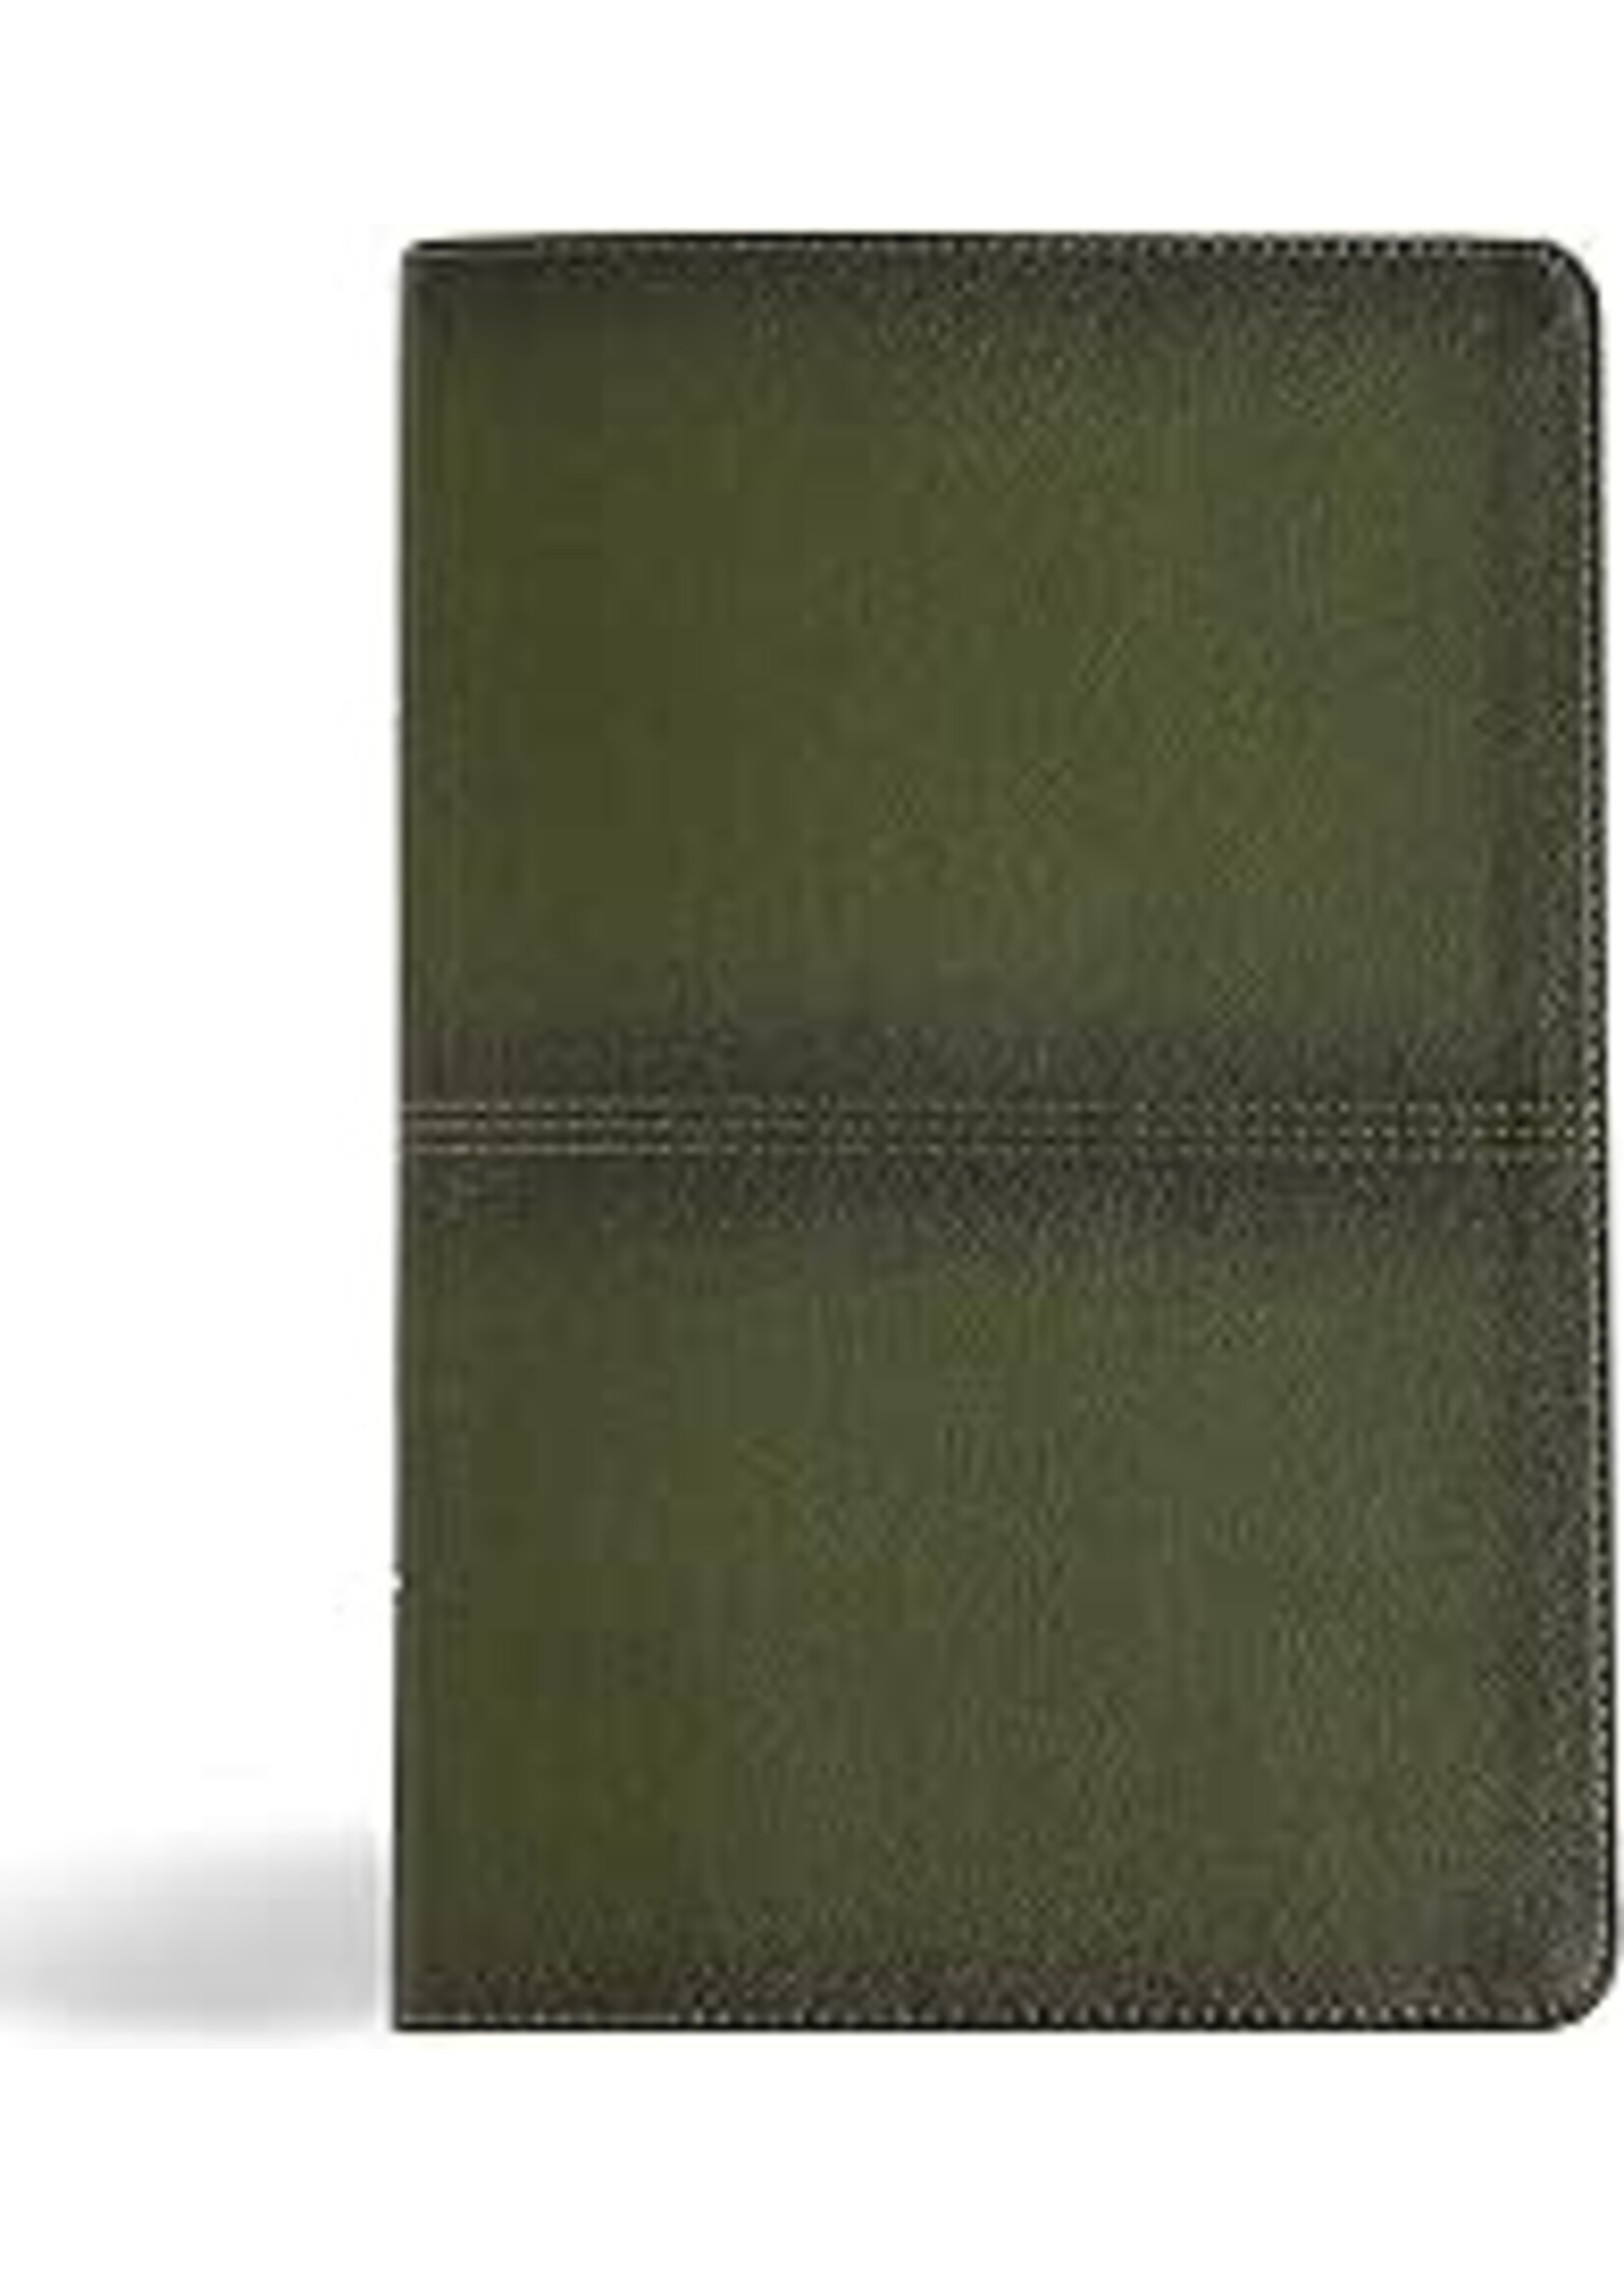 CSB Men's Daily Bible Olive Leathertouch